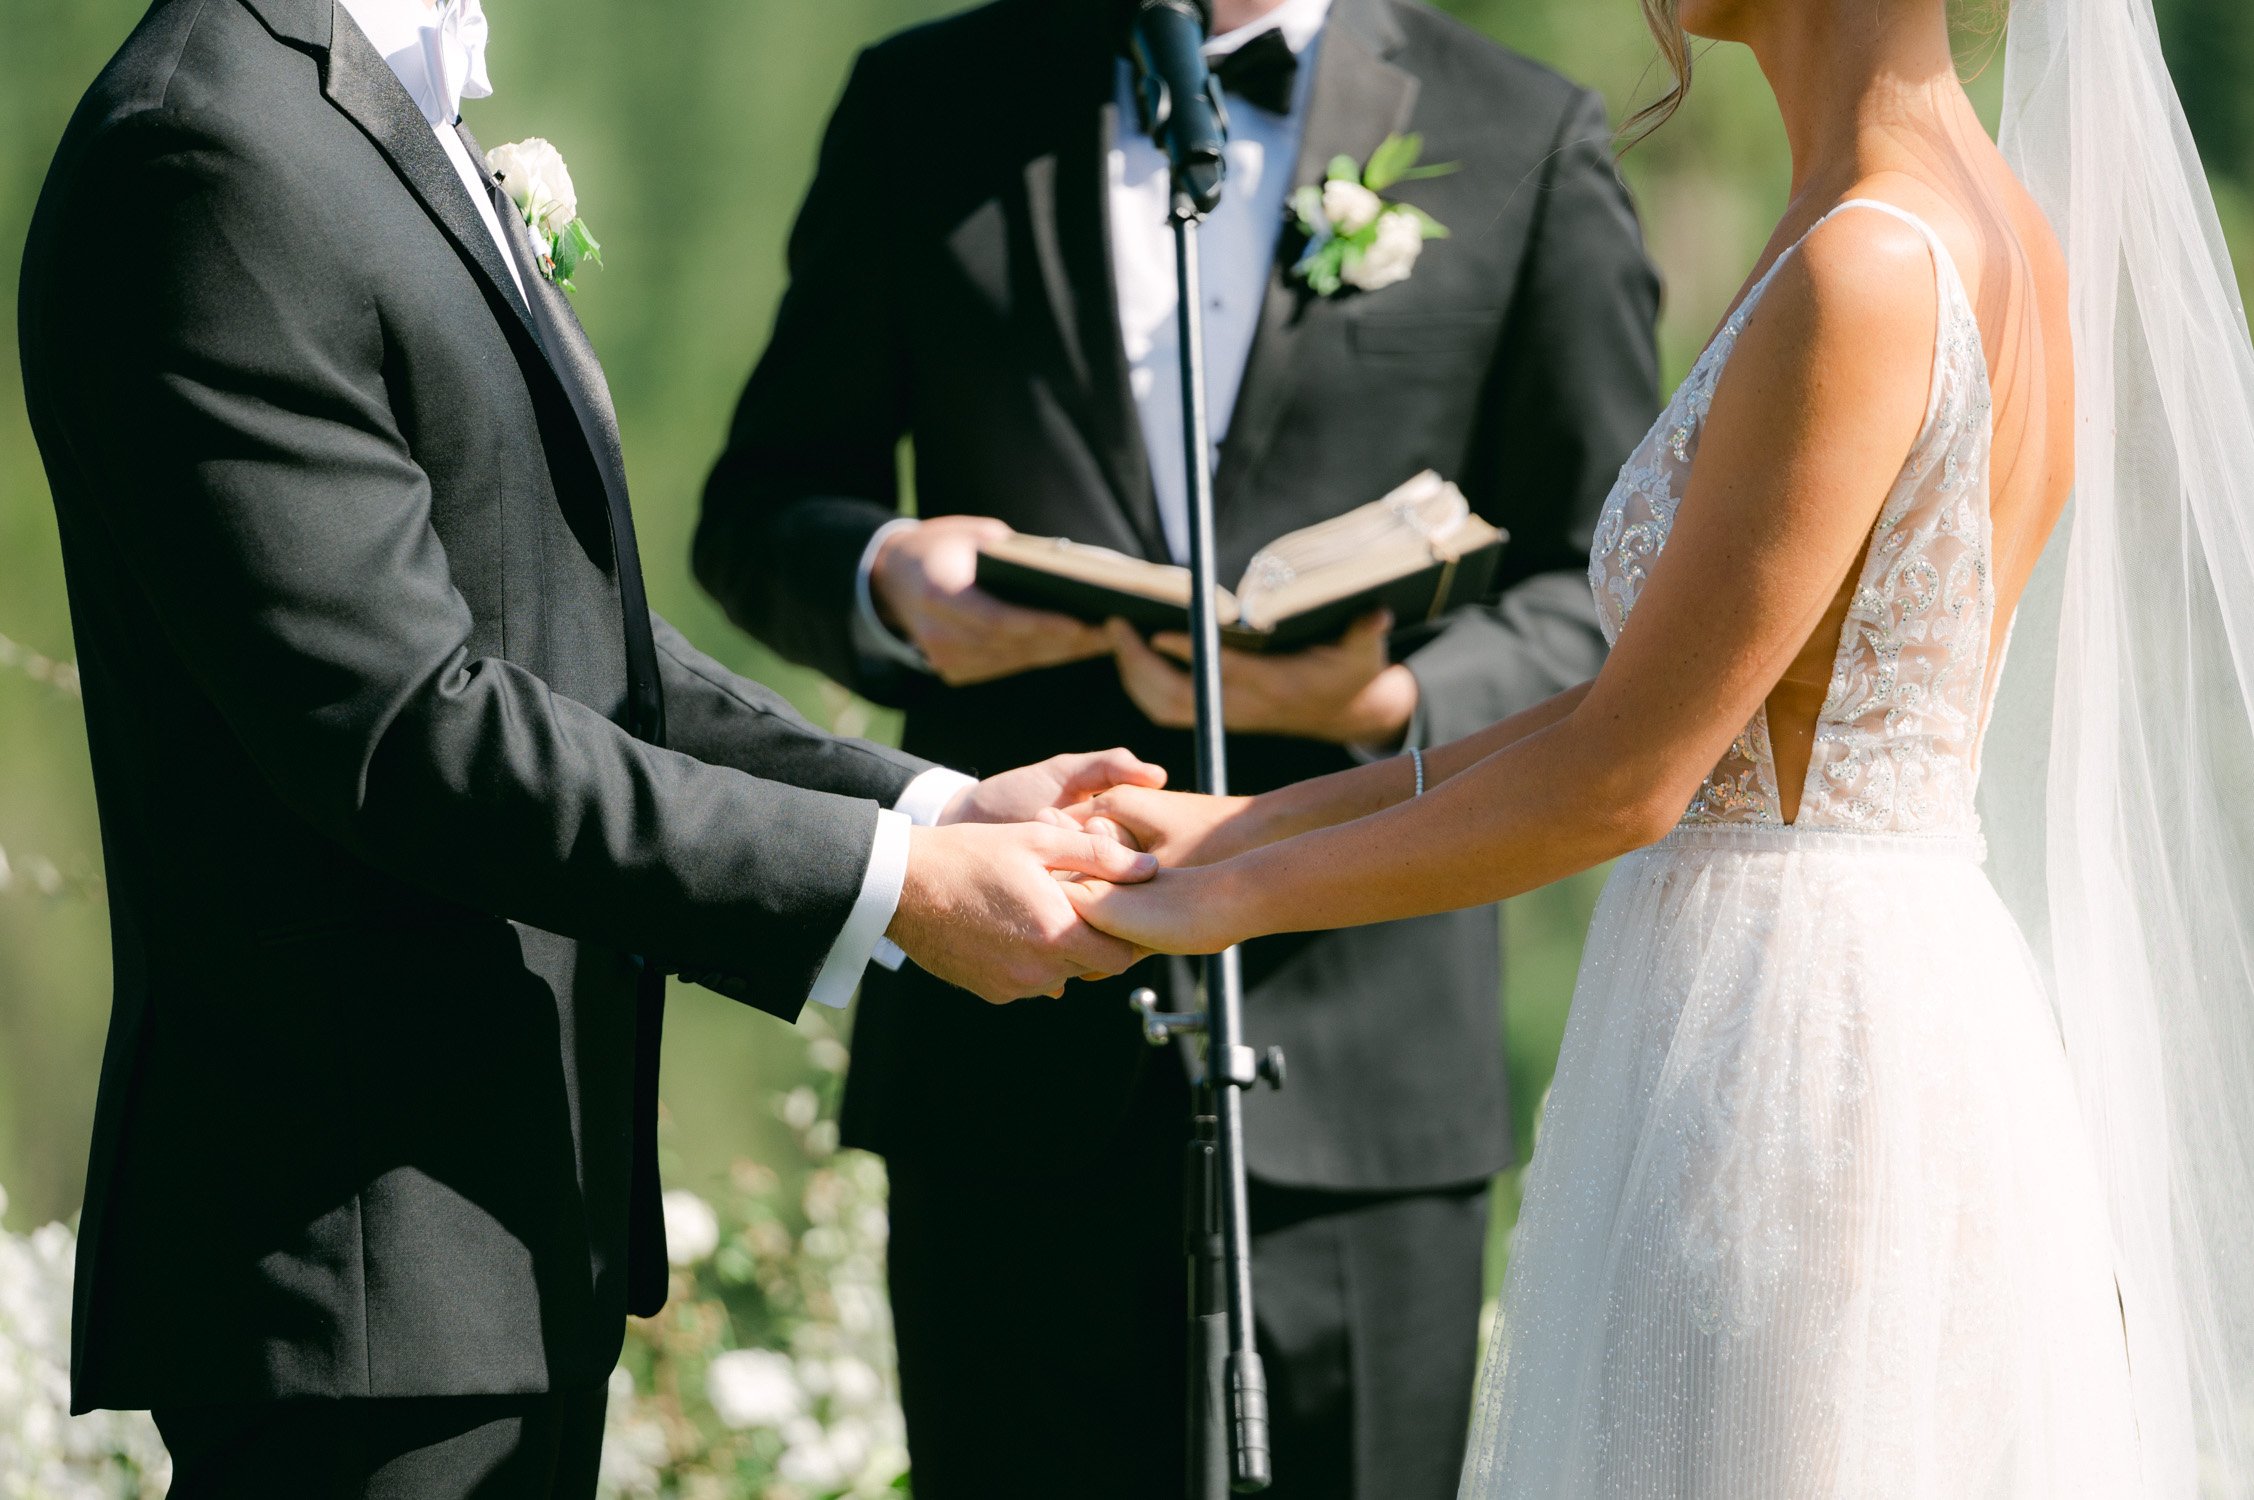 Martis Camp wedding, photo of couple holding hands